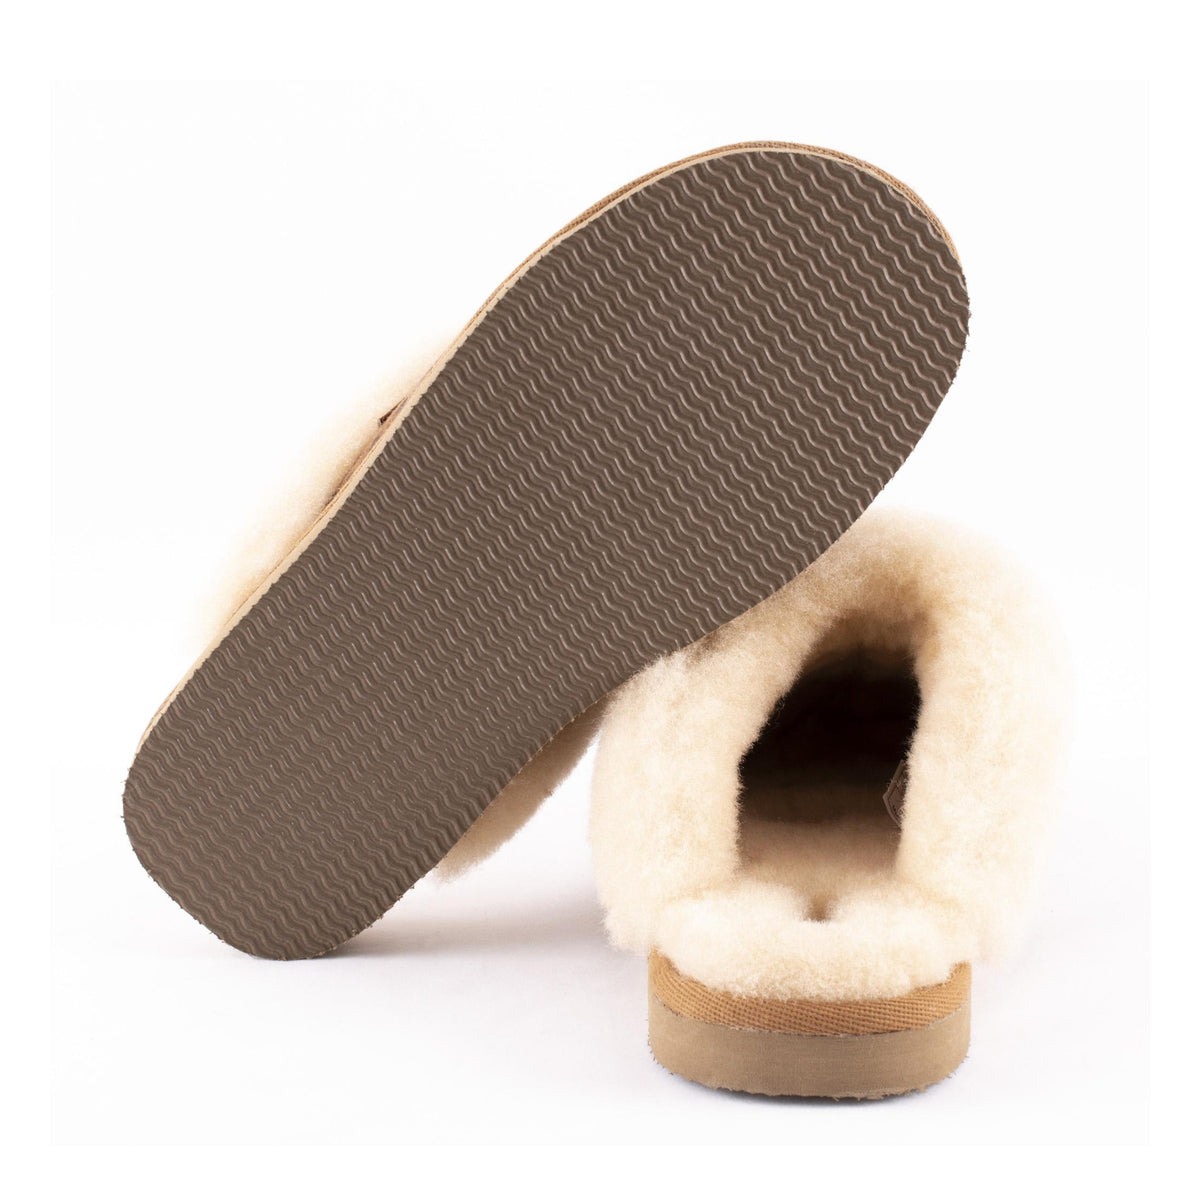 Shepherd of Sweden Sheepskin Slippers in leopard print. Available to buy from our UK independent store  Seen from underside